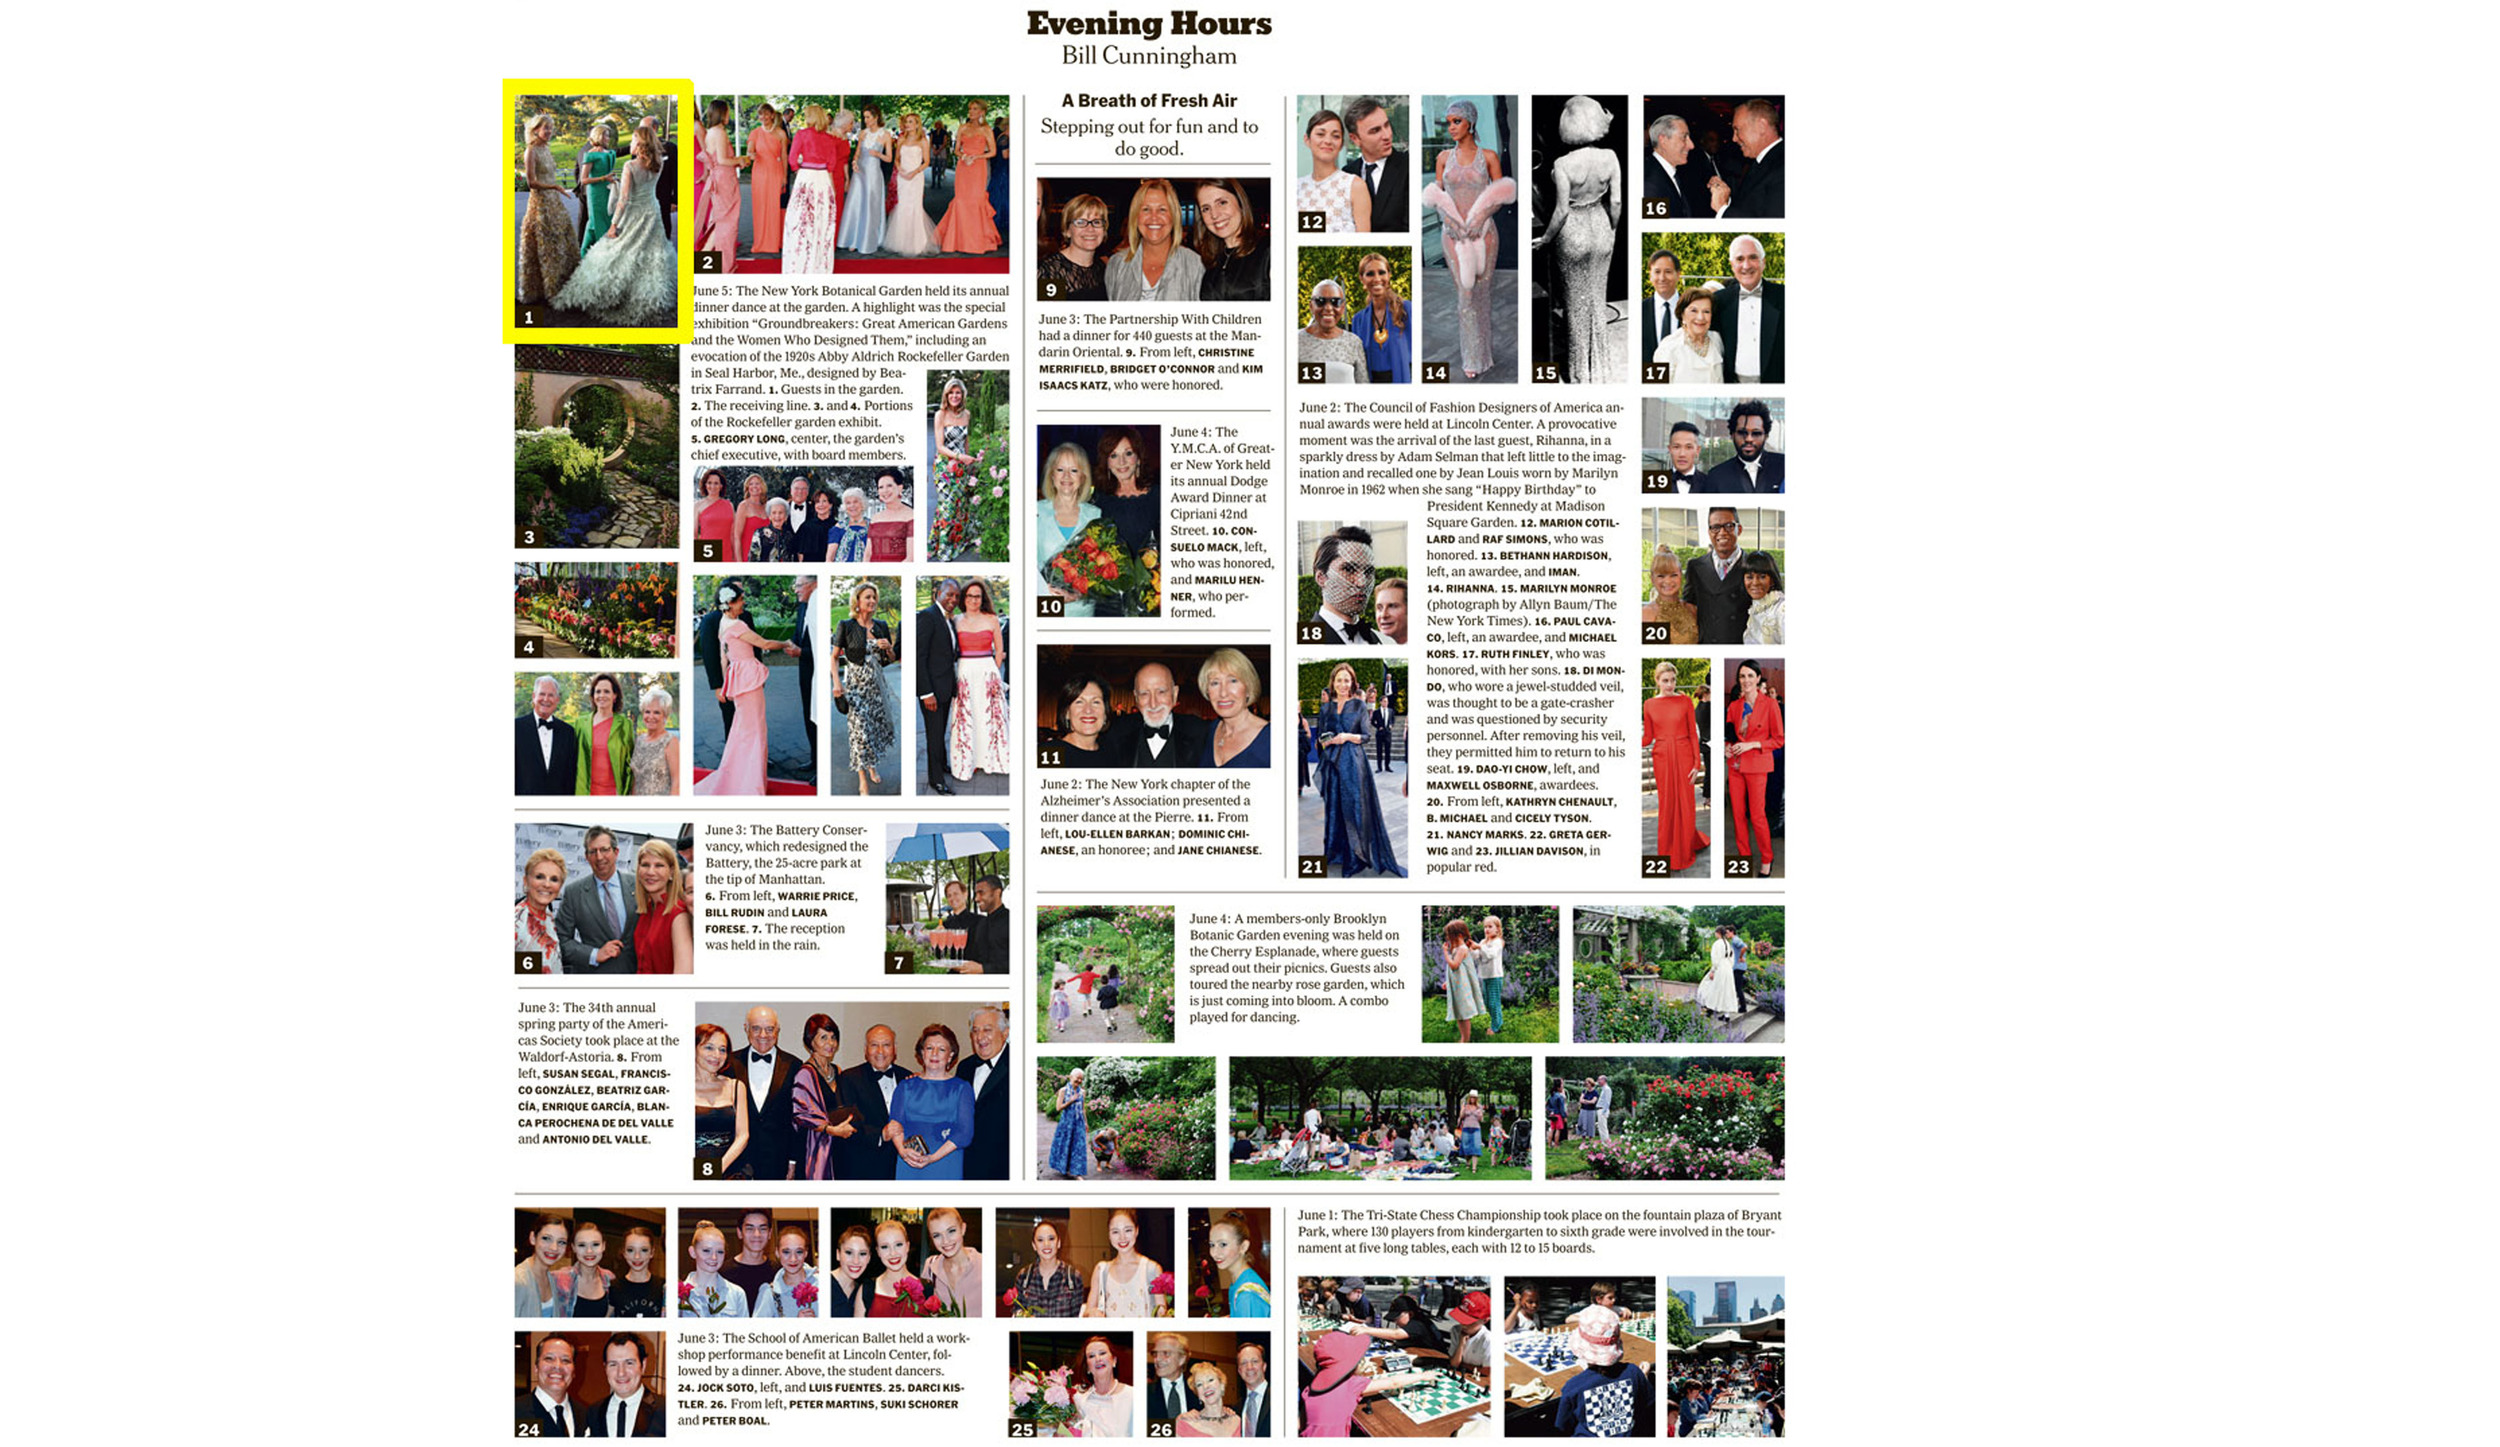  NY Times Sunday Style Section  FA Clients in Gold &amp; Pale Mint Gowns  New York Botanical Garden Gala  June 2014 